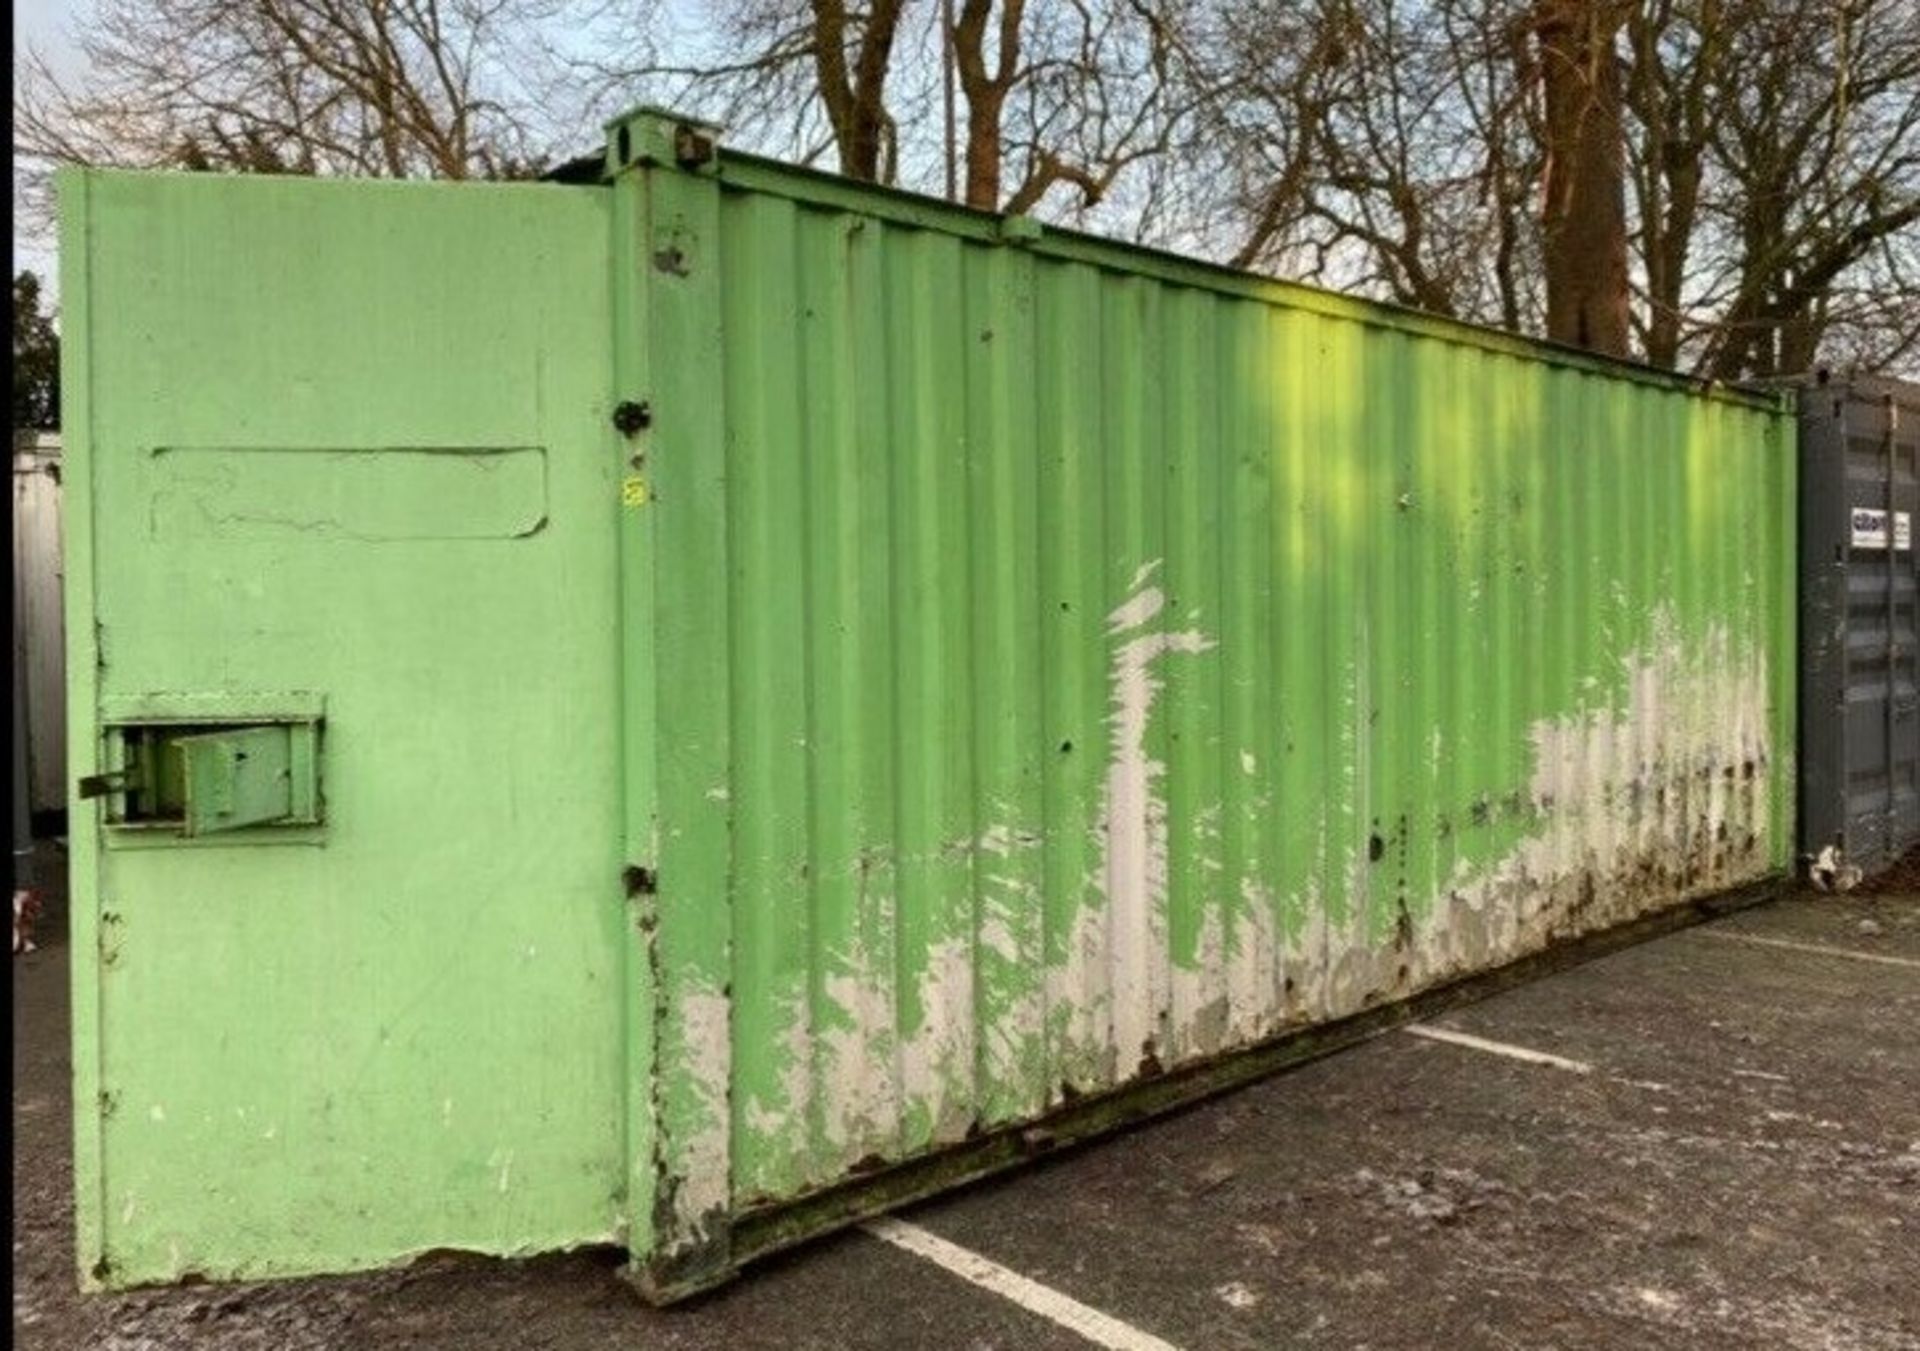 Site office / storage container